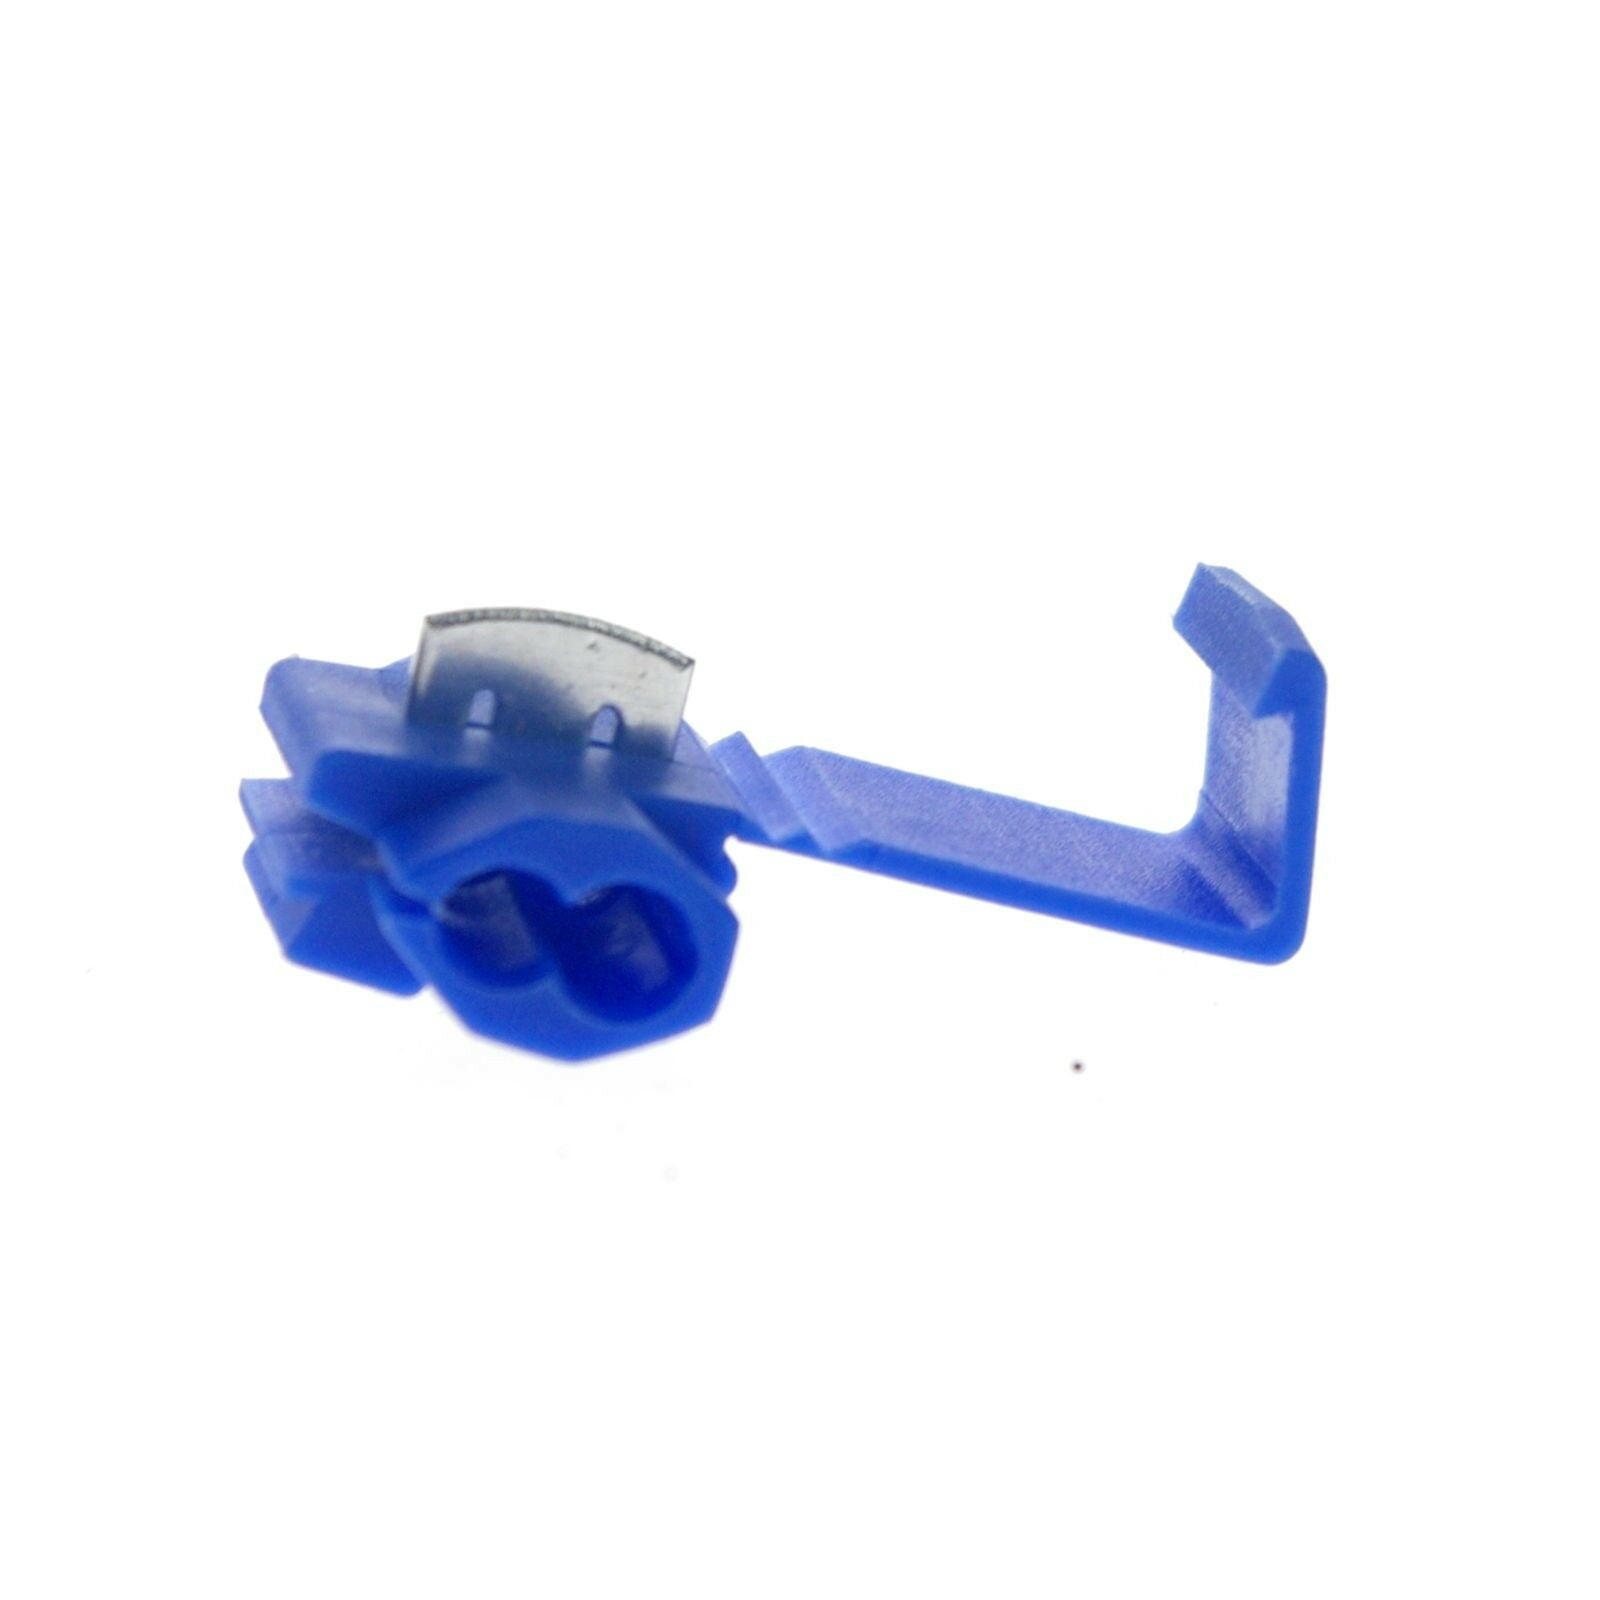 (20) Blue Self-stripping Connector 0.75-2.5mm2 Cable Size Electrical Tap Connect